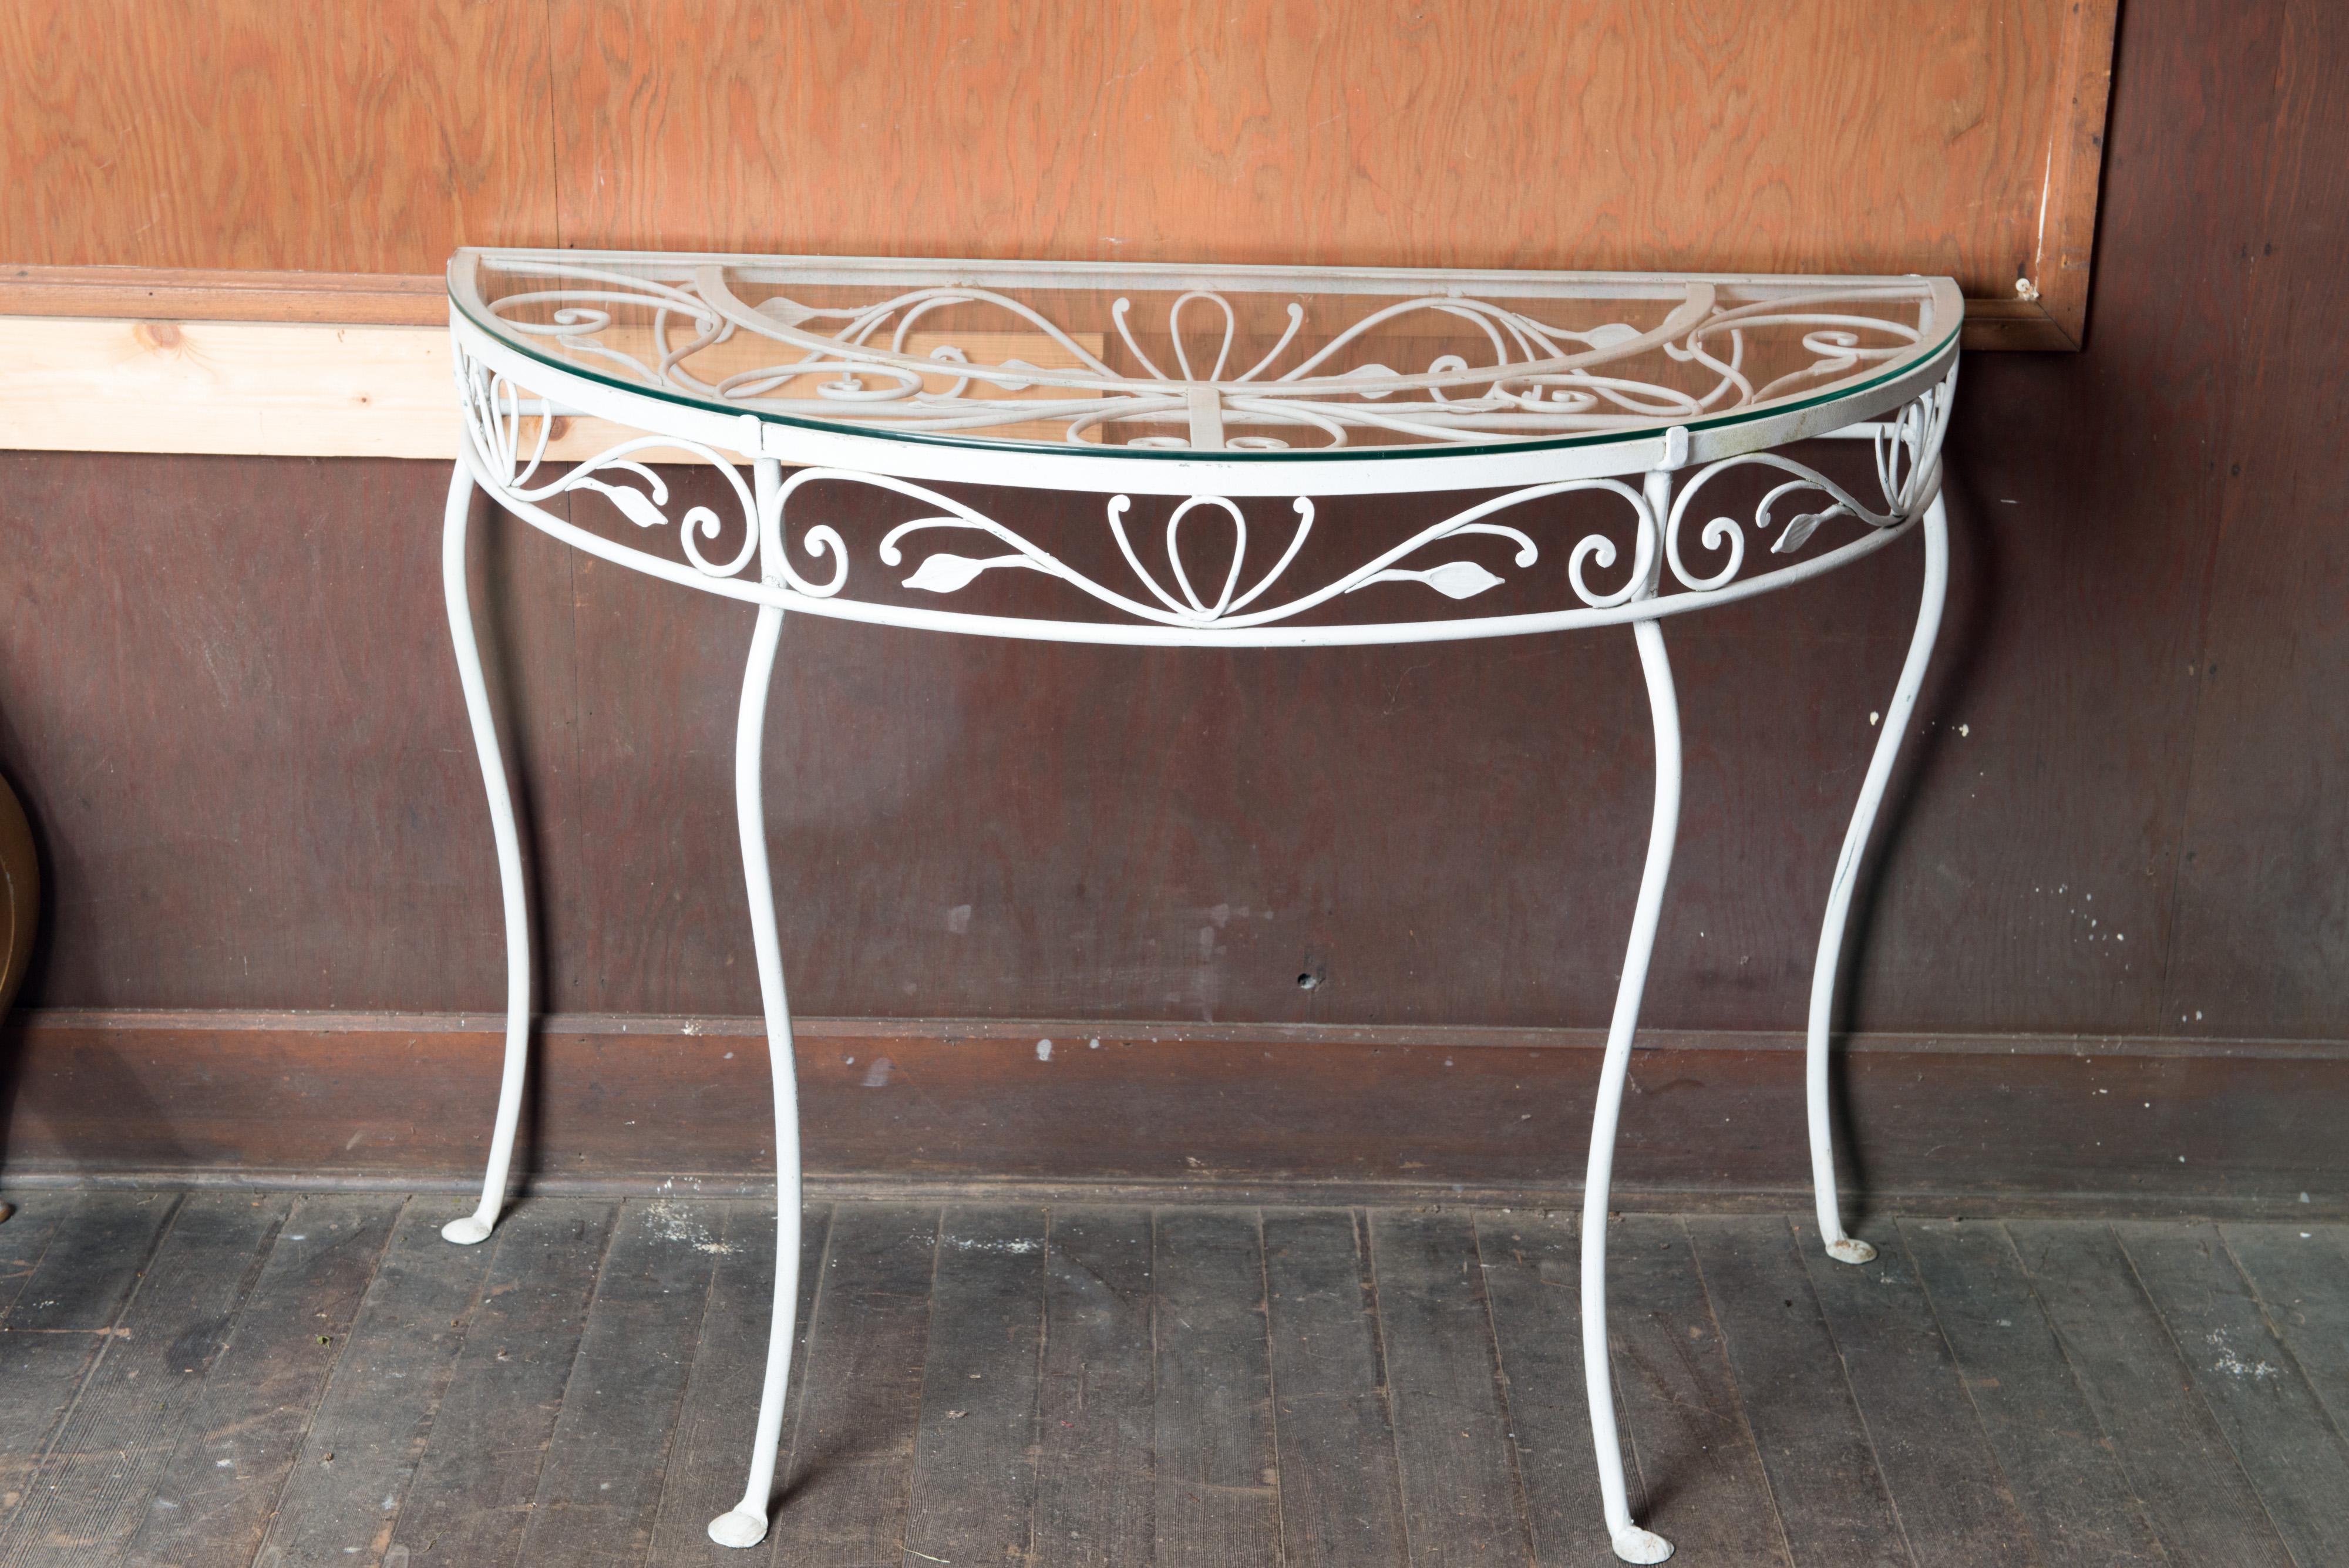 1940s fine quality wrought iron Salterini demi lune console table with glass top. Salterini was consider the best quality wrought iron garden furniture of the time.